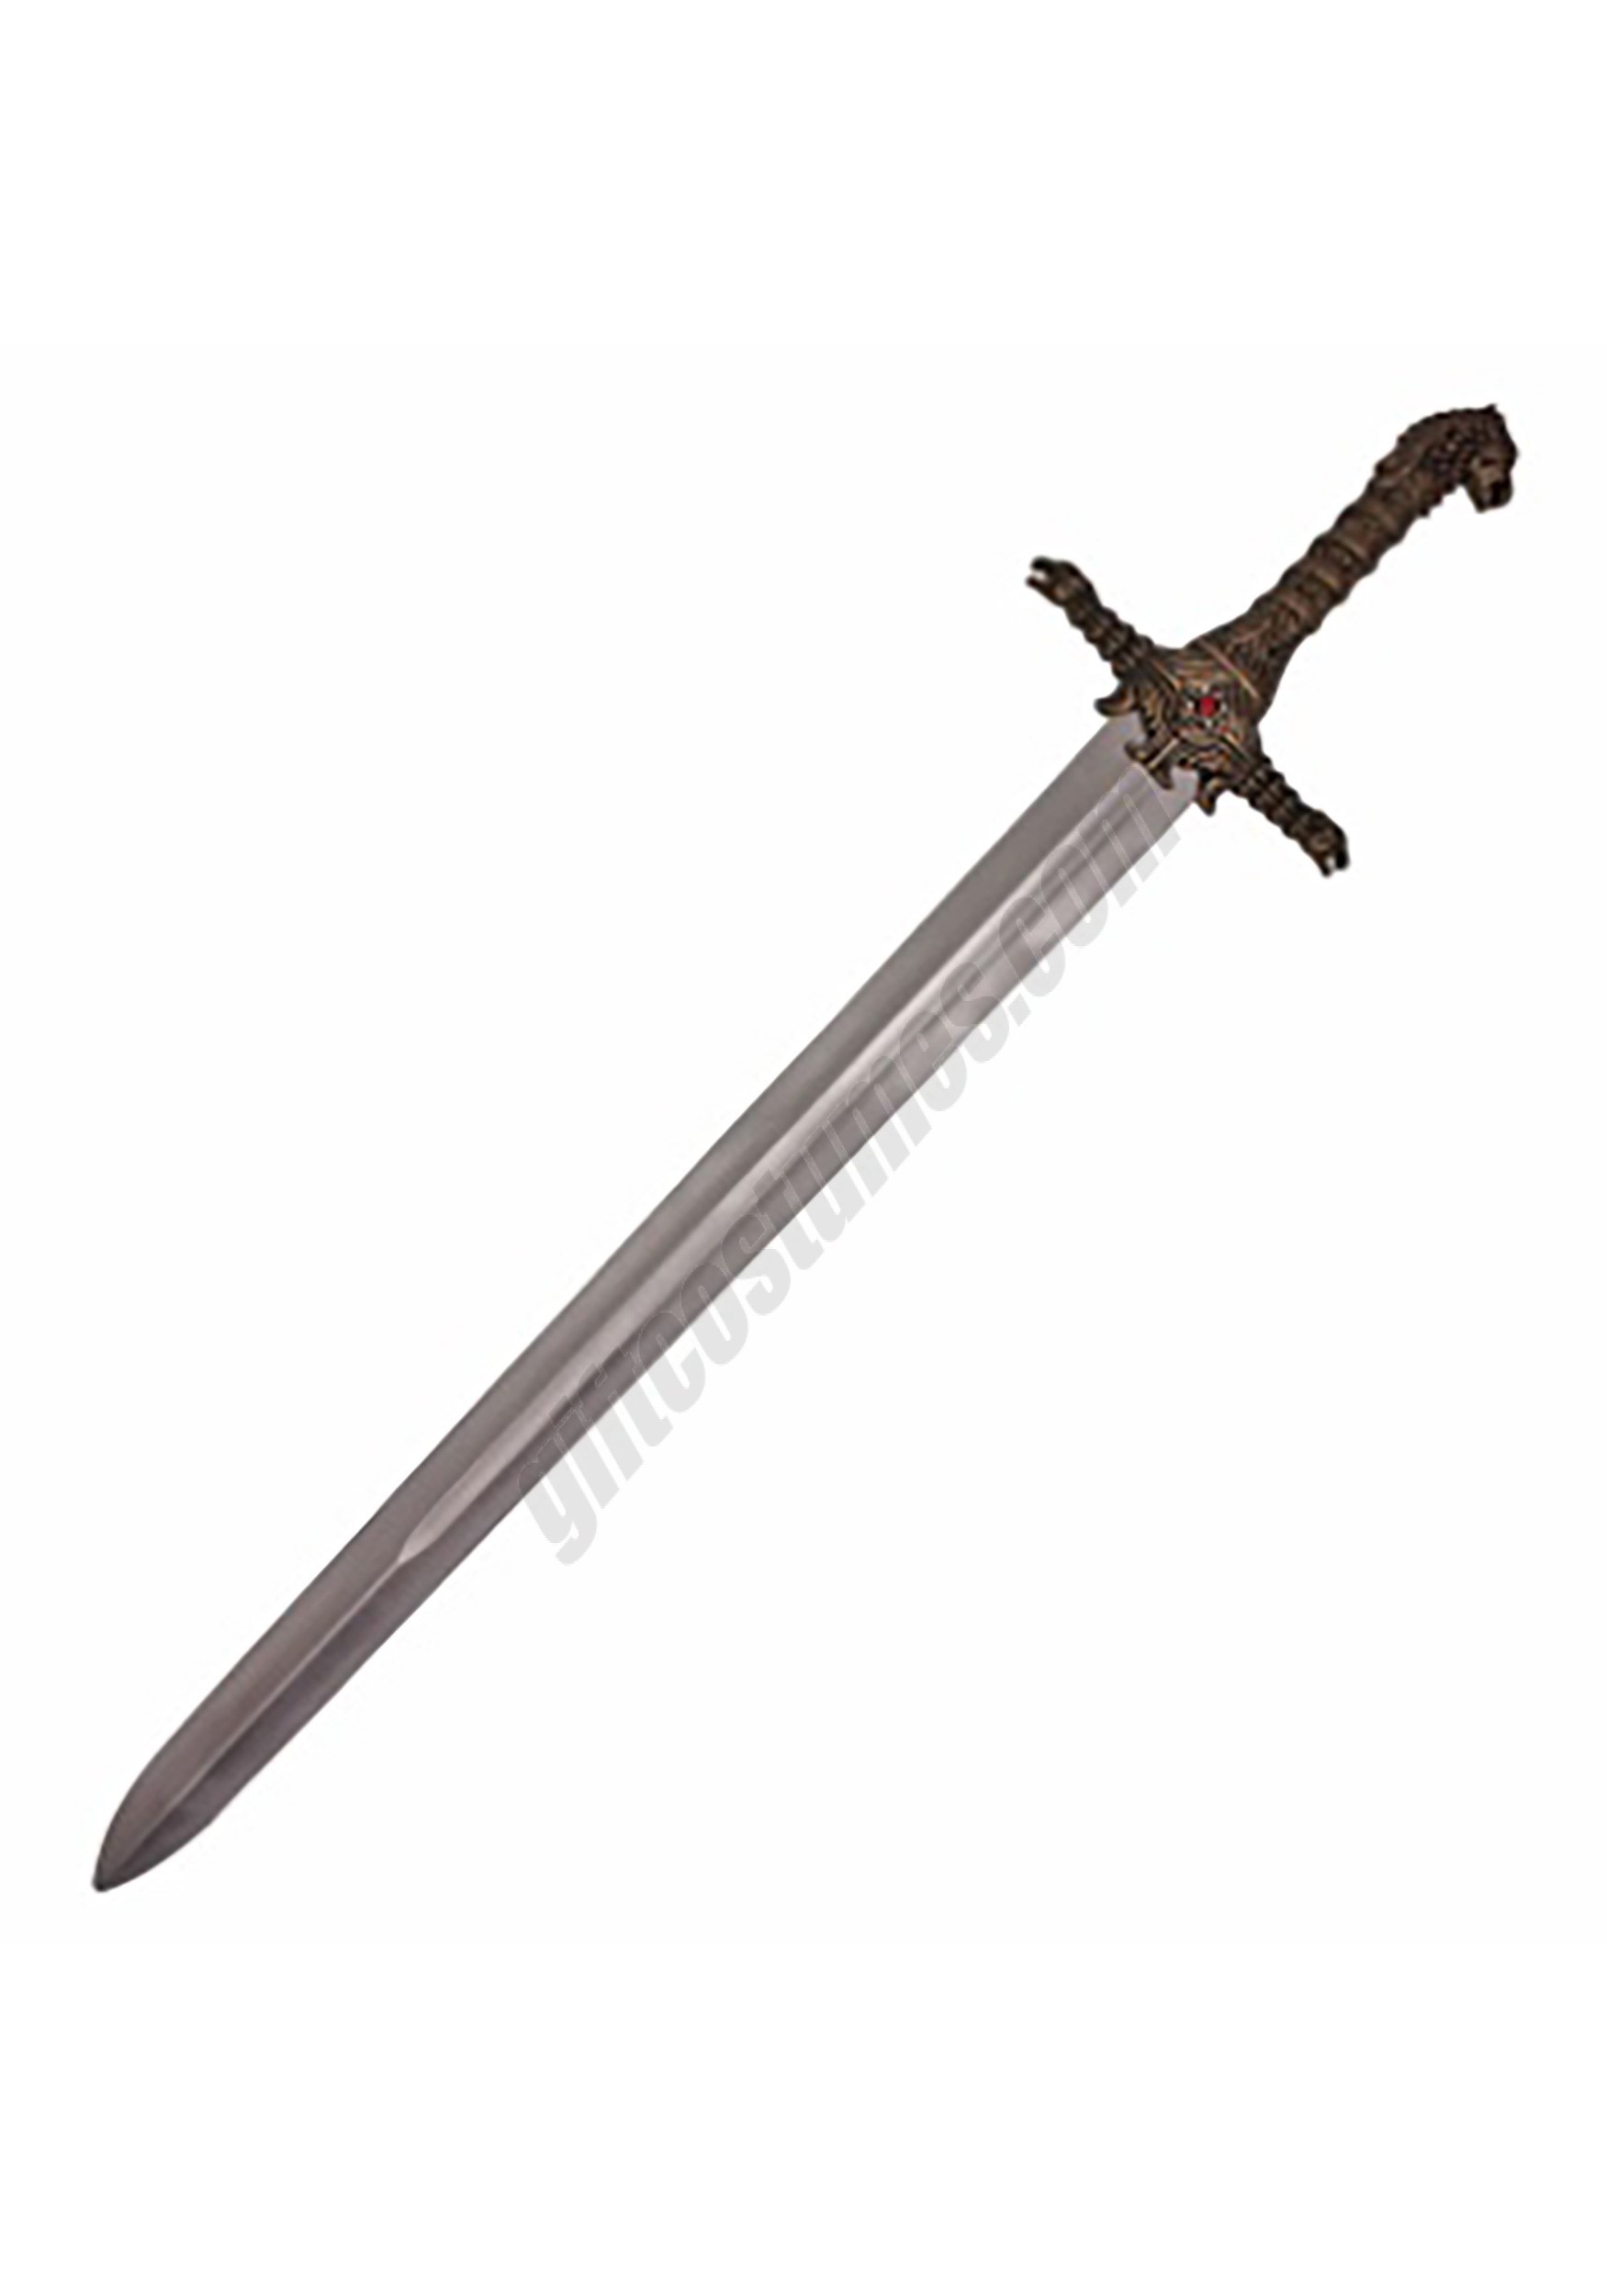 Game of Thrones Oathkeeper Sword Promotions - Game of Thrones Oathkeeper Sword Promotions